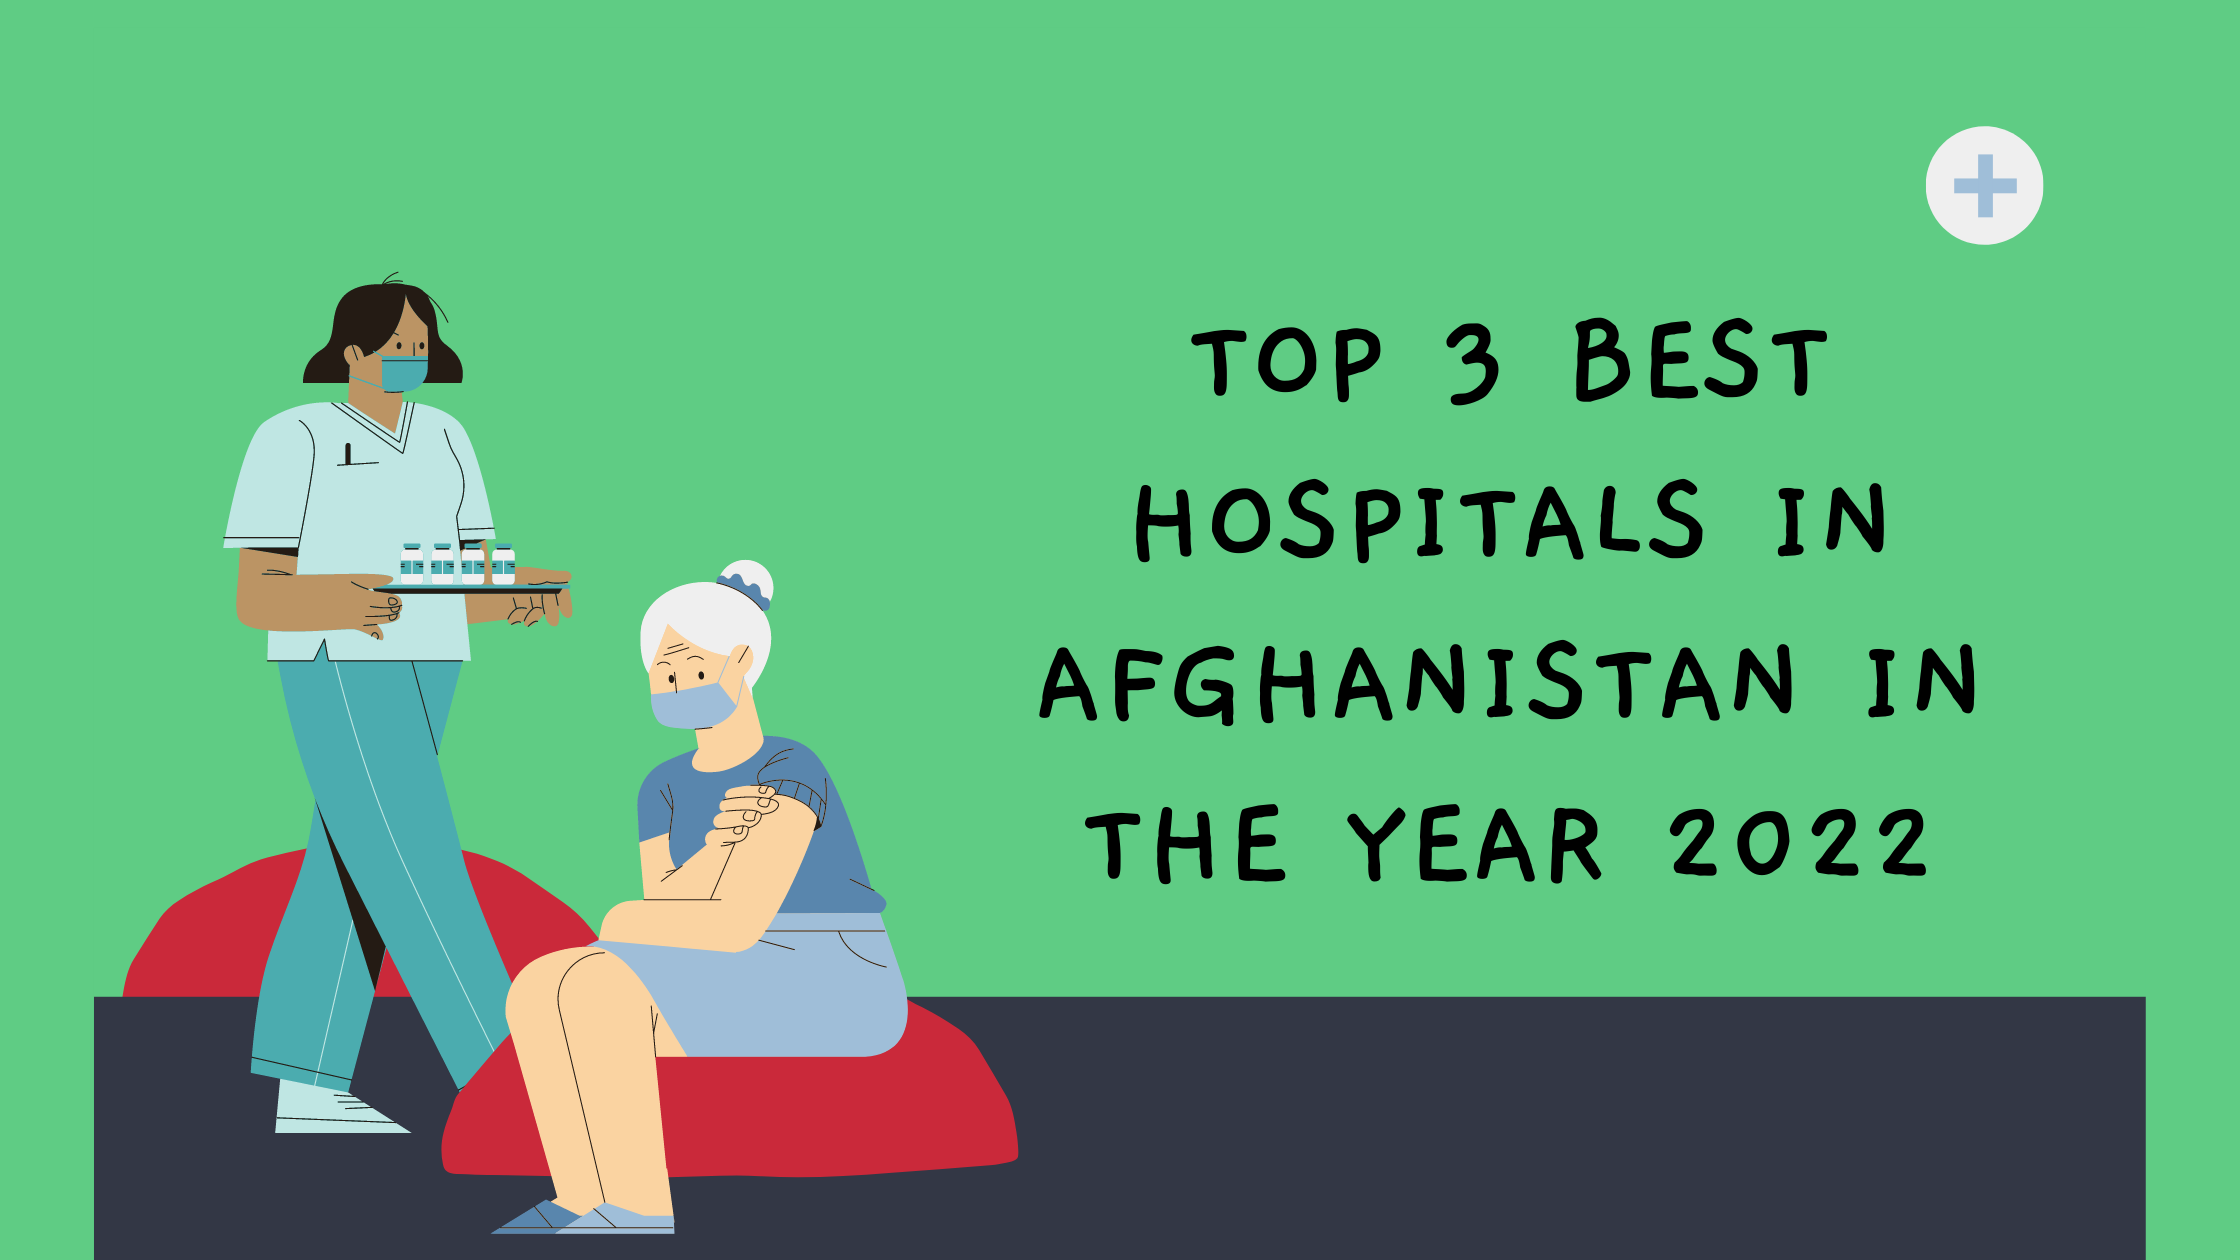 Top 3 best Hospitals in Afghanistan in The year 2022